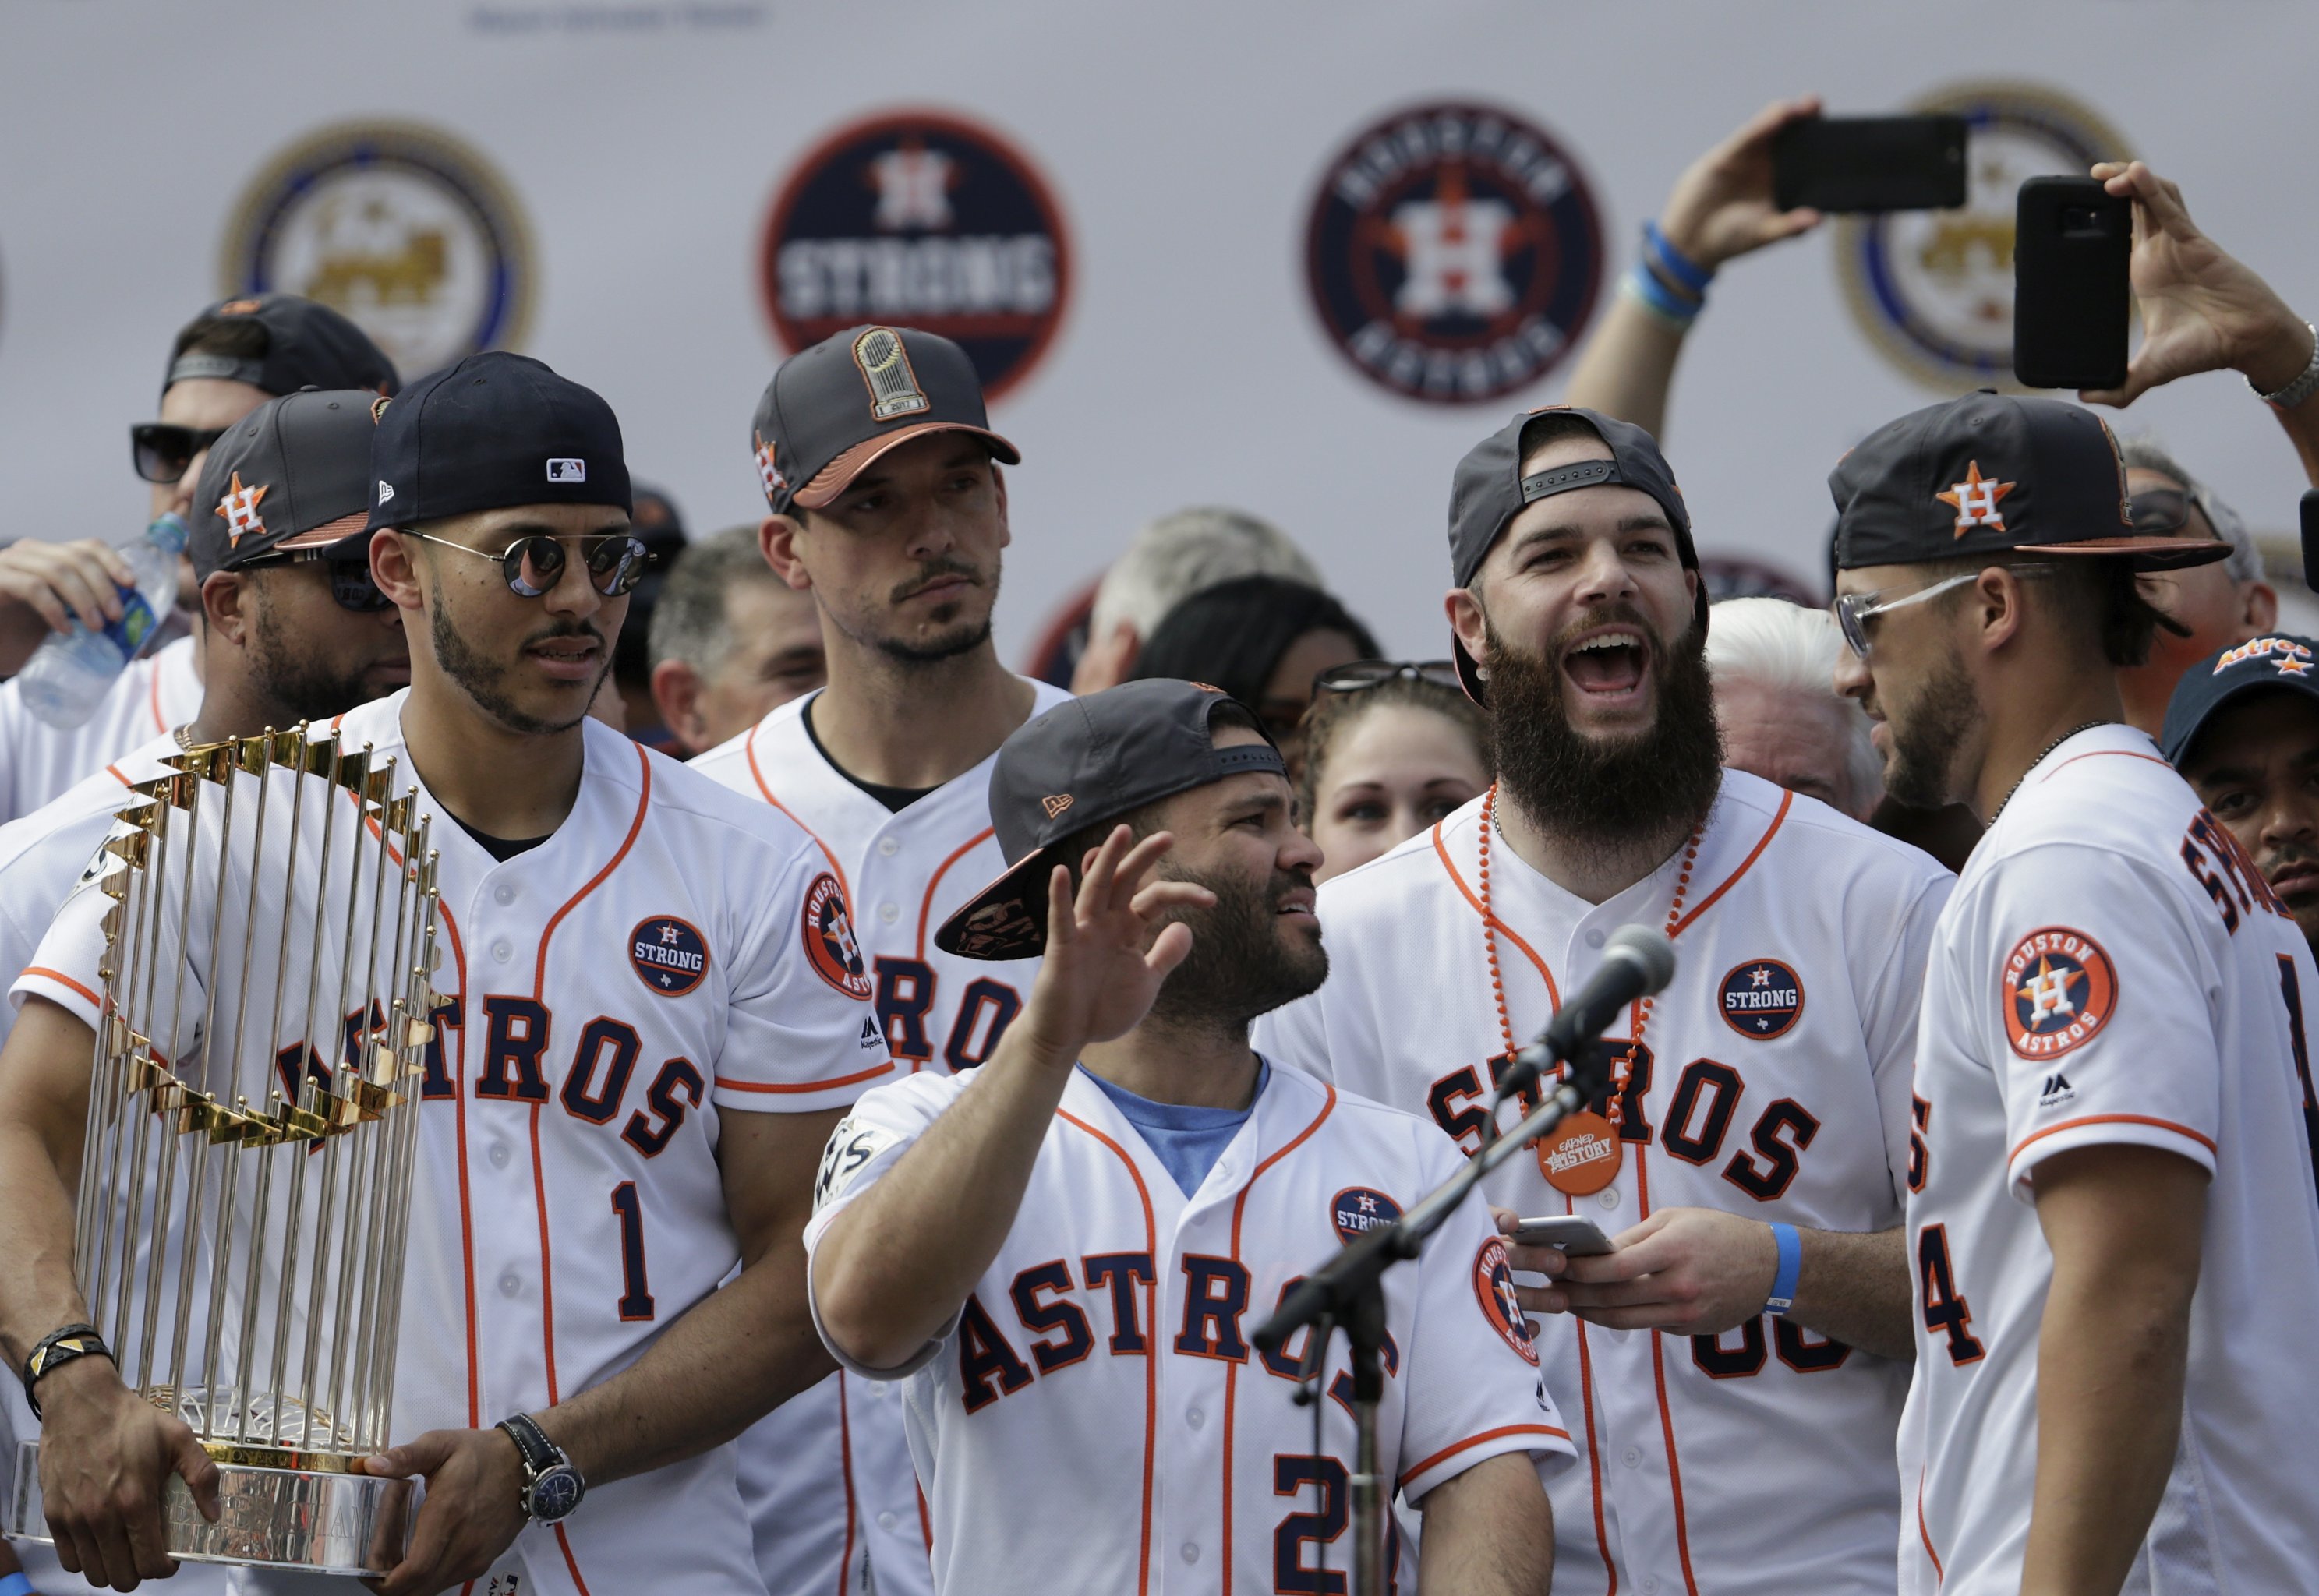 WORLD SERIES CHAMPS: Astros are World Champions after defeating